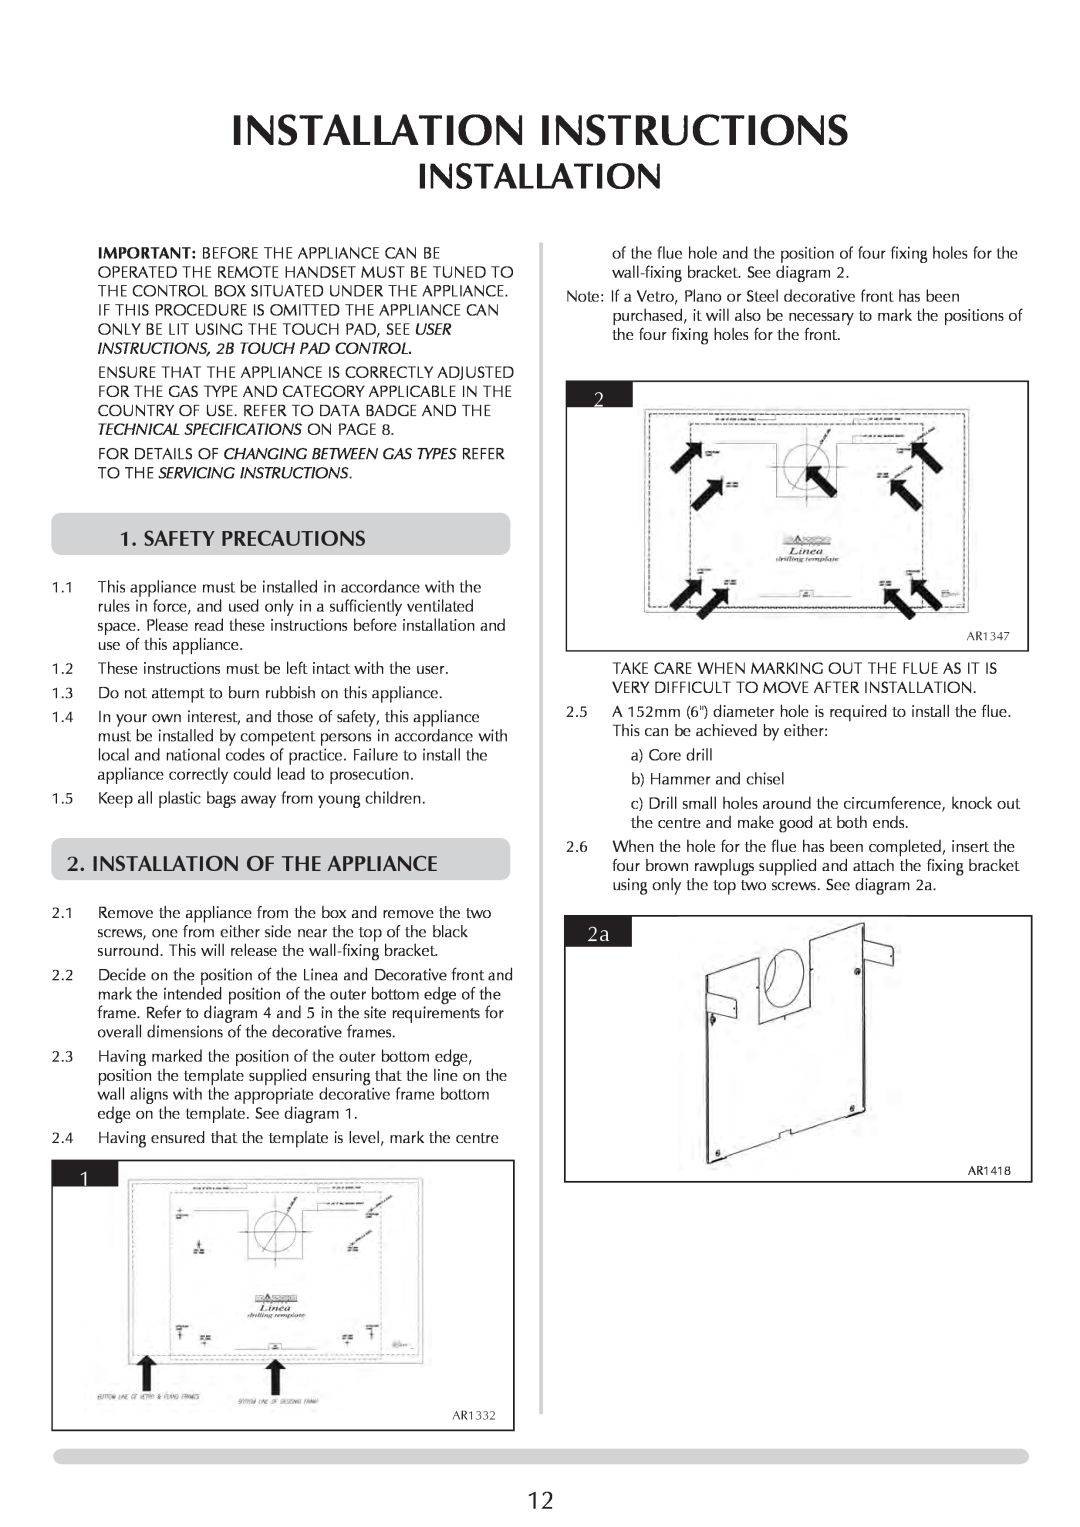 Stovax PR0731 manual Installation Instructions, Safety Precautions, installation of the appliance 